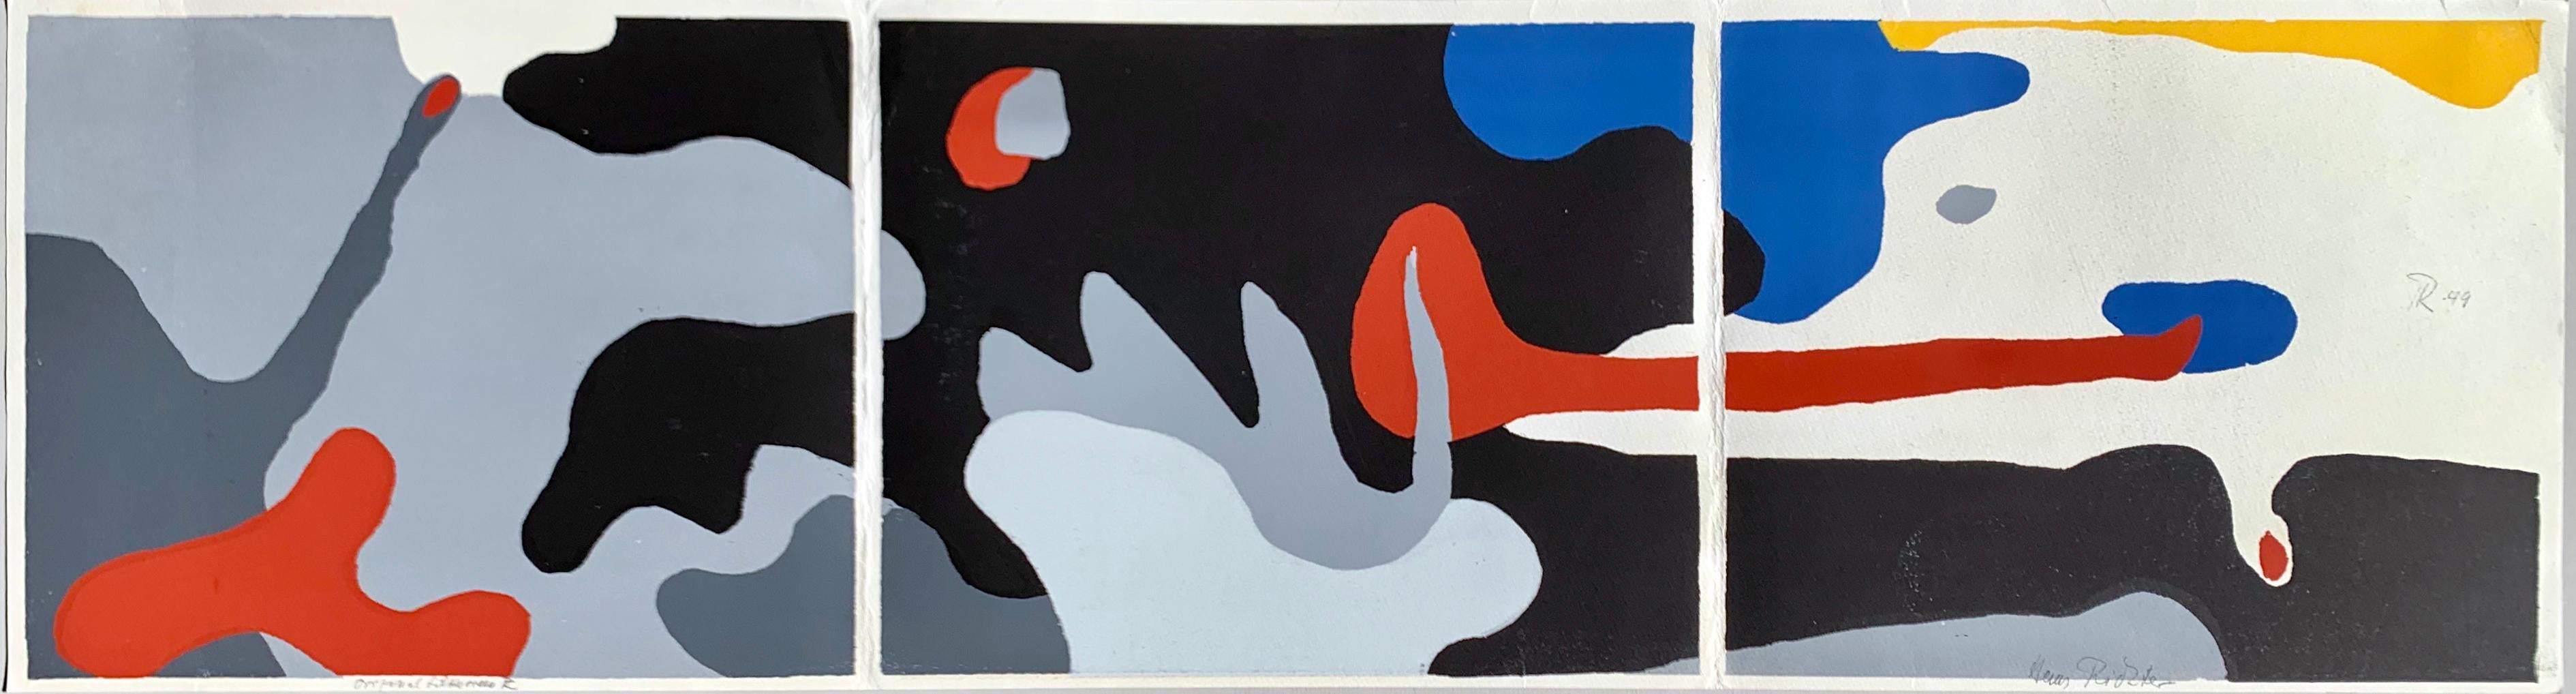 "Transformation - Dusk, Night, Dawn" is a modern abstract silkscreen on paper created by one of the Dada movement's founder, German artist Hans Richter (1888 - 1976). The abstract artwork is composed of three rectangular images in which fluid color